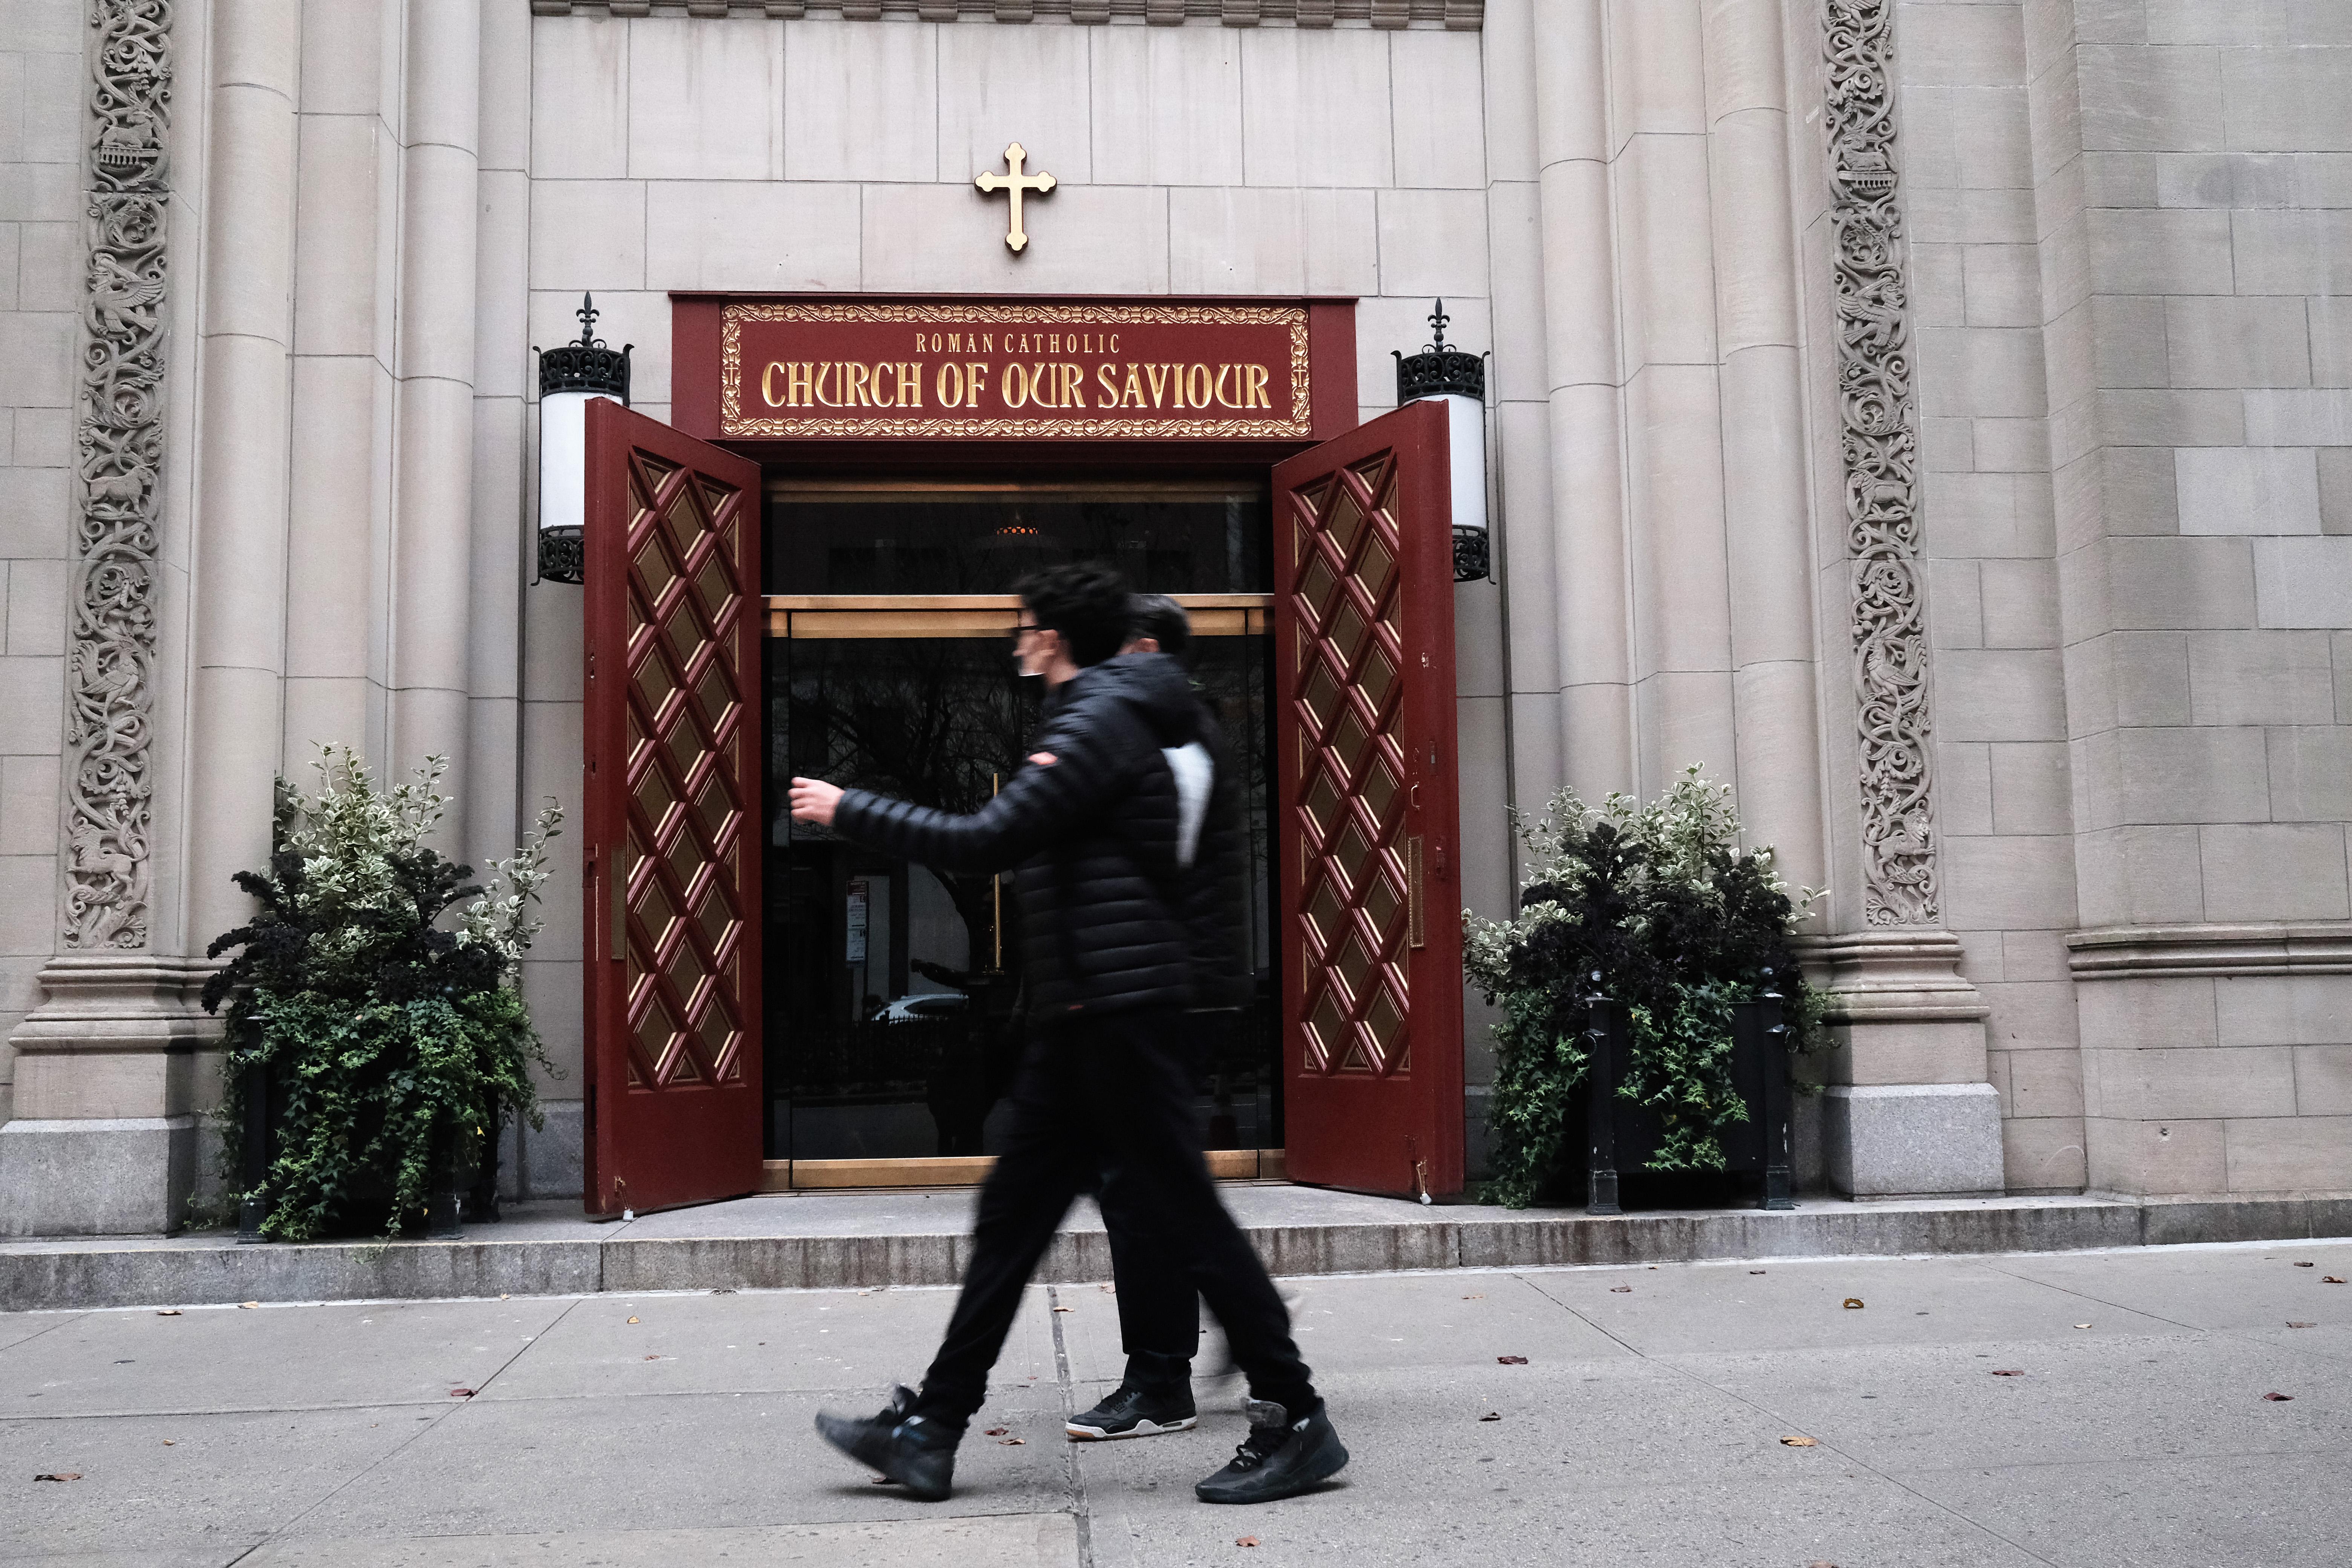 The doorway to "The Church of Our Savior" in New York.